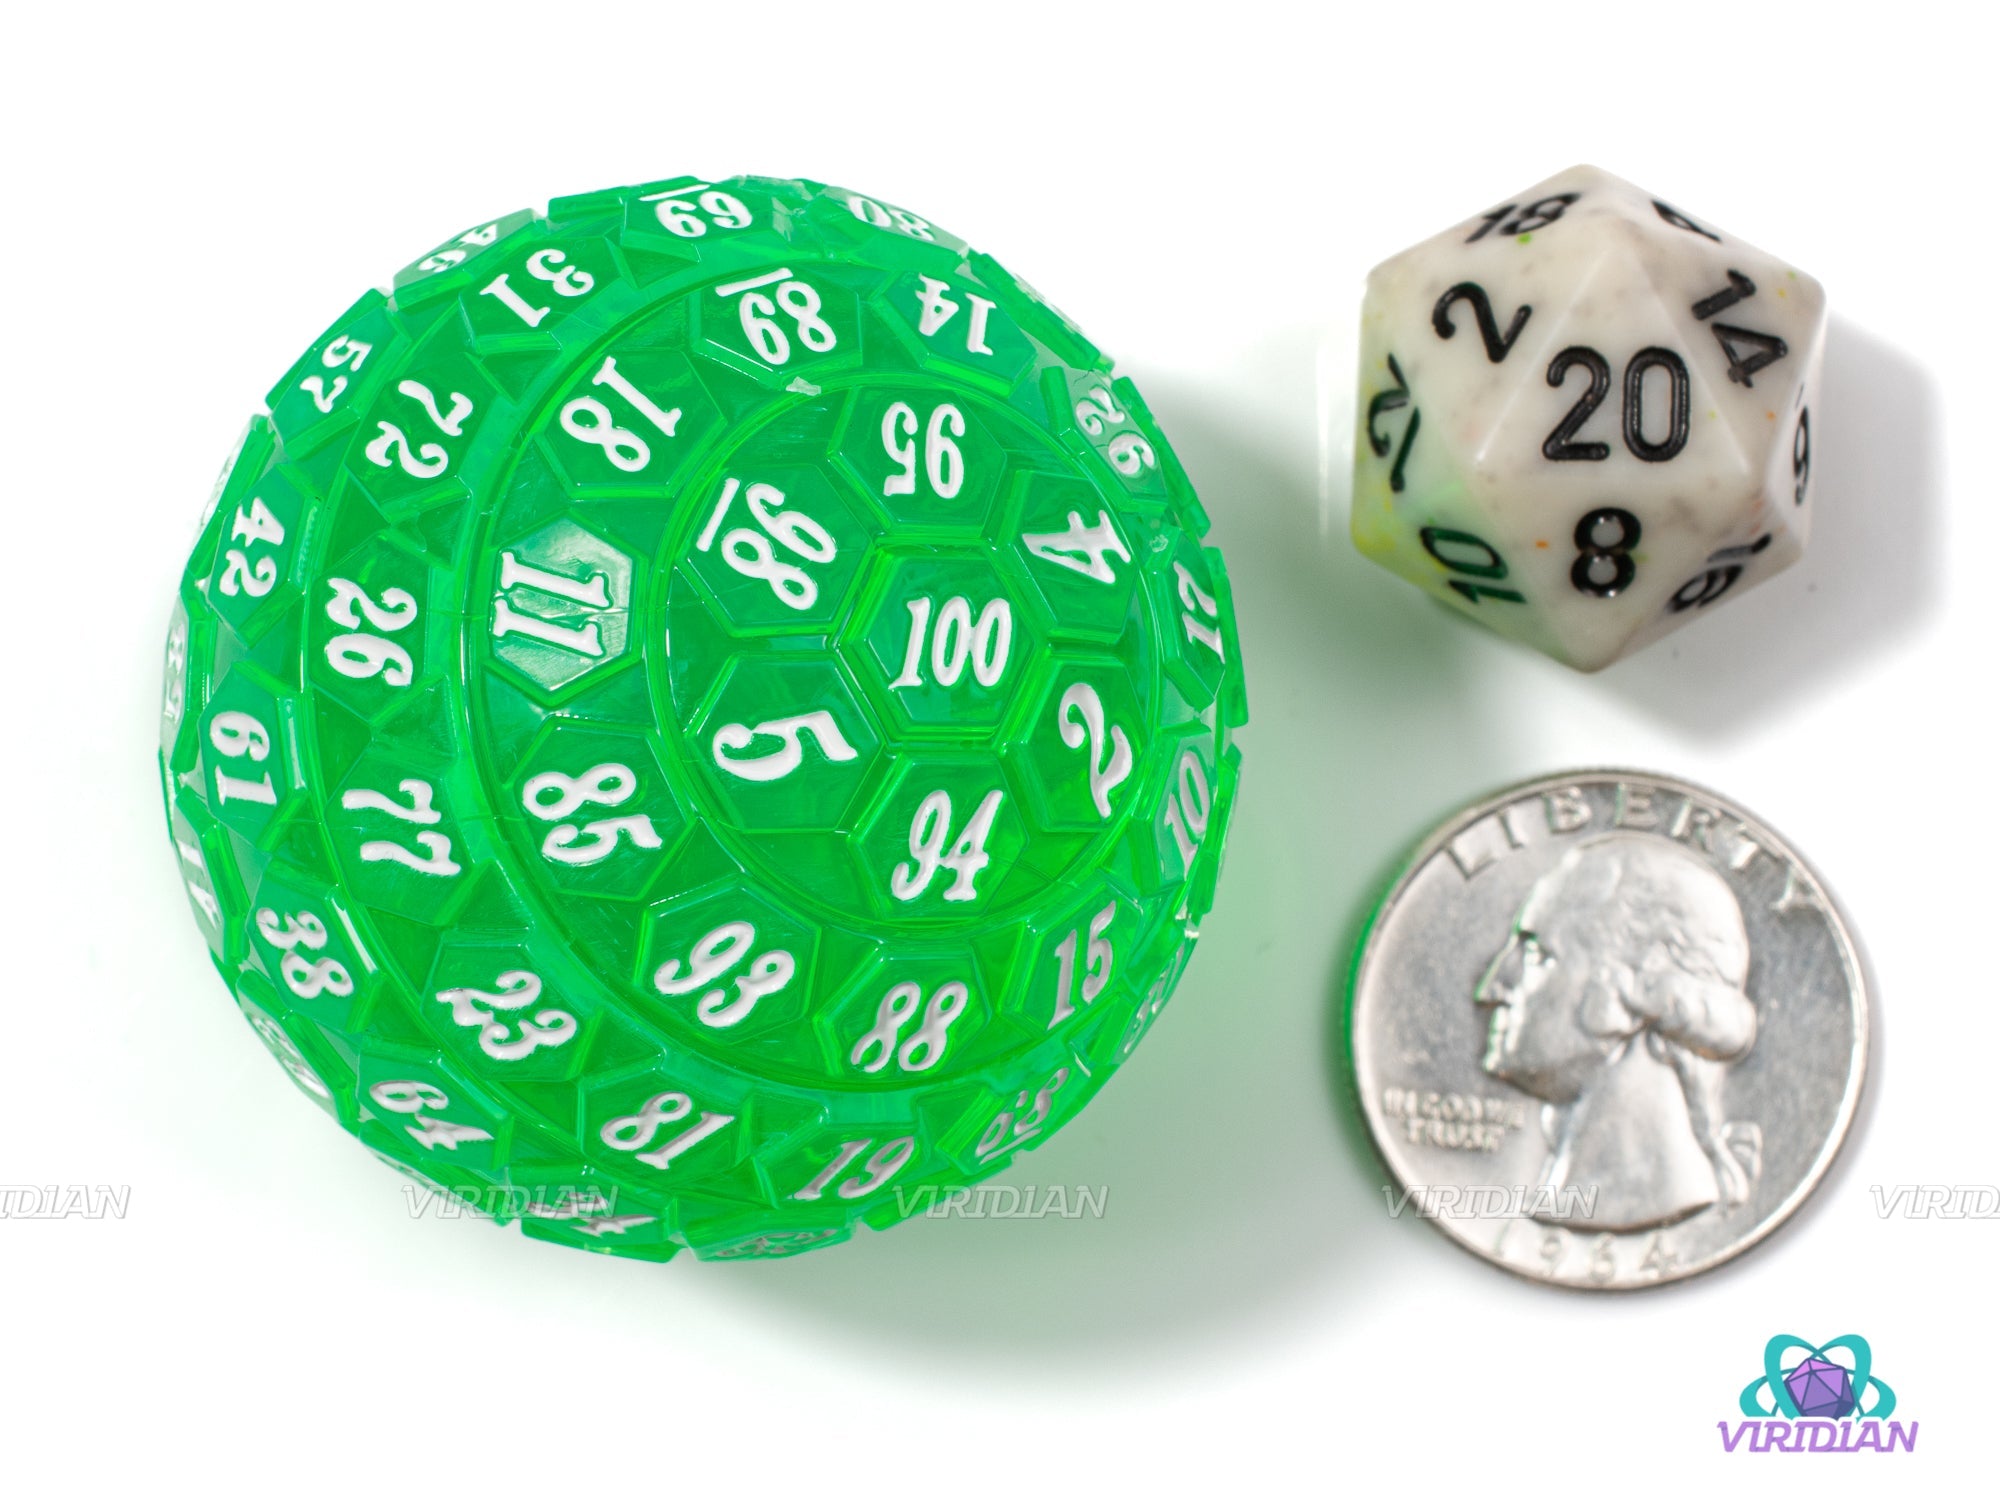 Green & White D100 | Translucent 45mm Giant Acrylic Die (1)